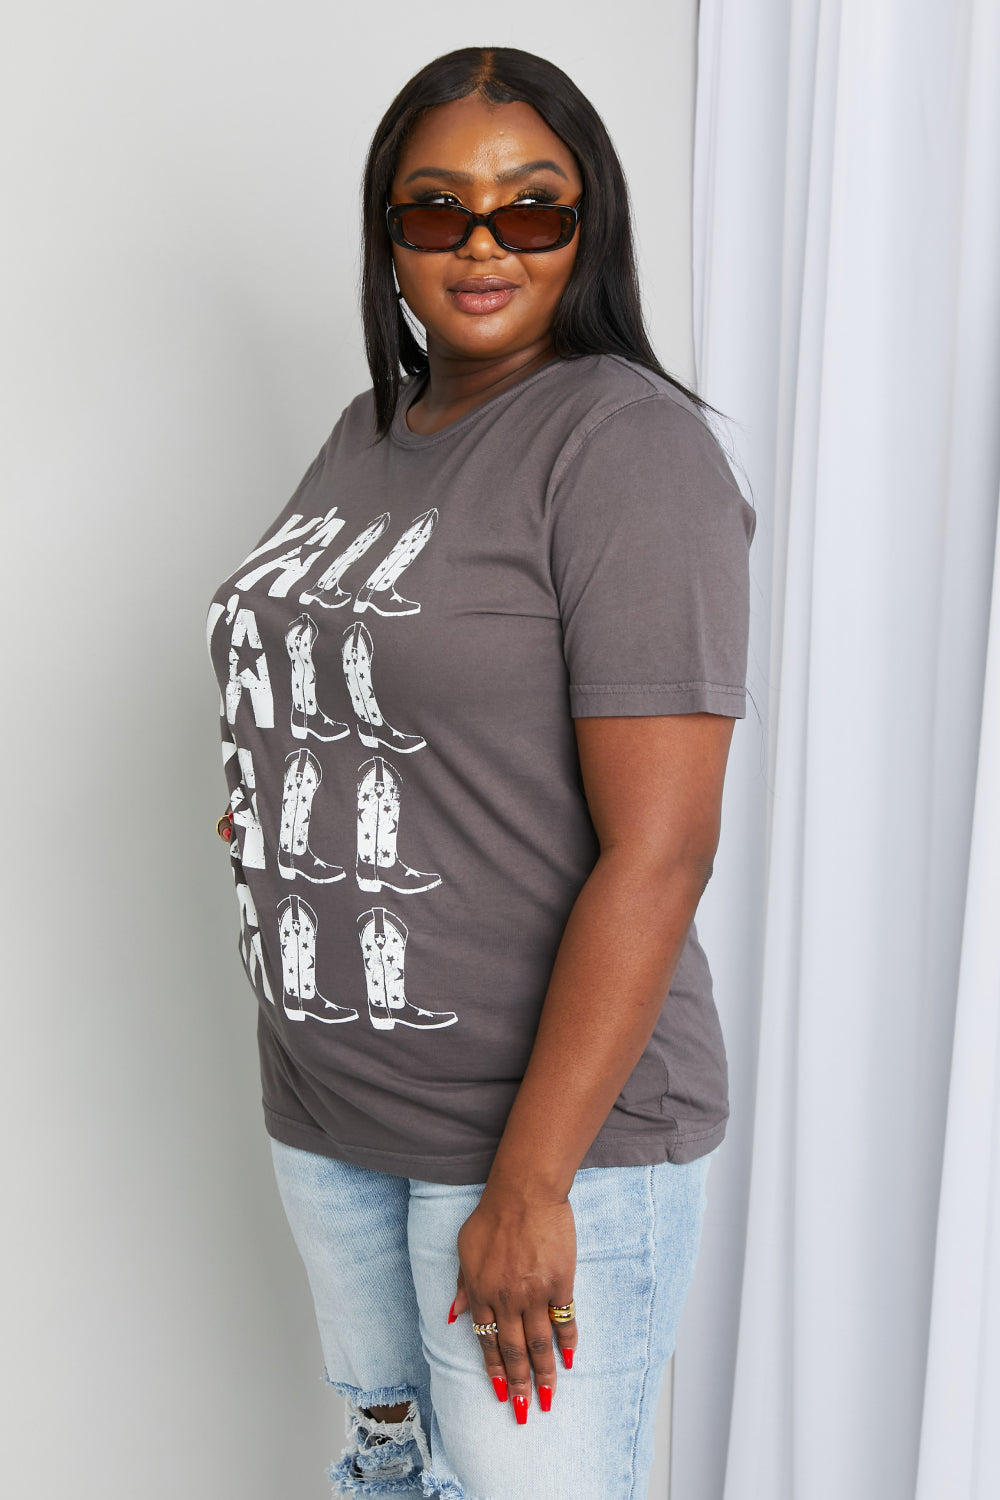 mineB Full Size Y'ALL Cowboy Boots Graphic Tee | - CHANELIA